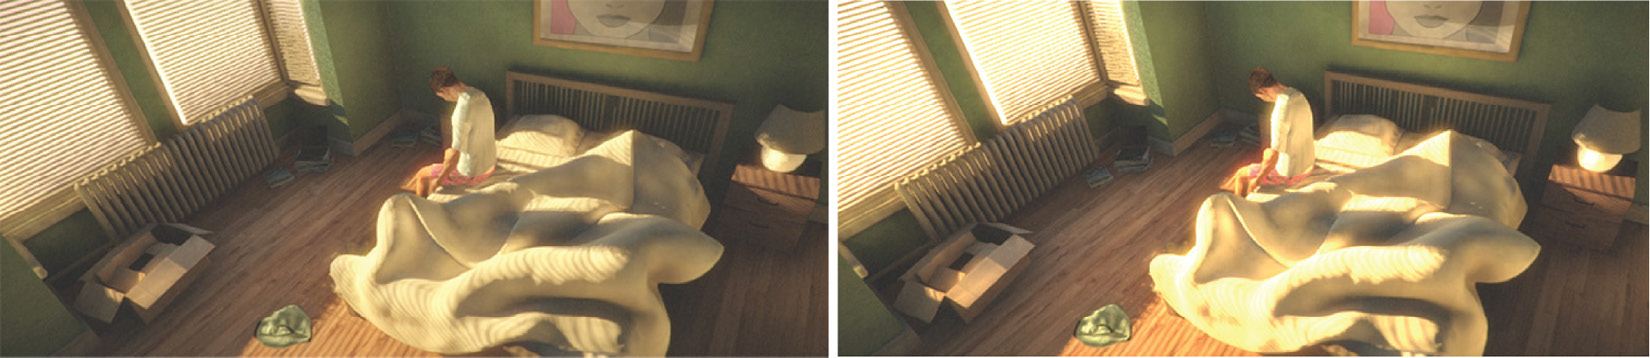 Figure 9.12 An LDR-rendered scene (left) and an HDR scene with corrected overbrights using tonemapping (right)